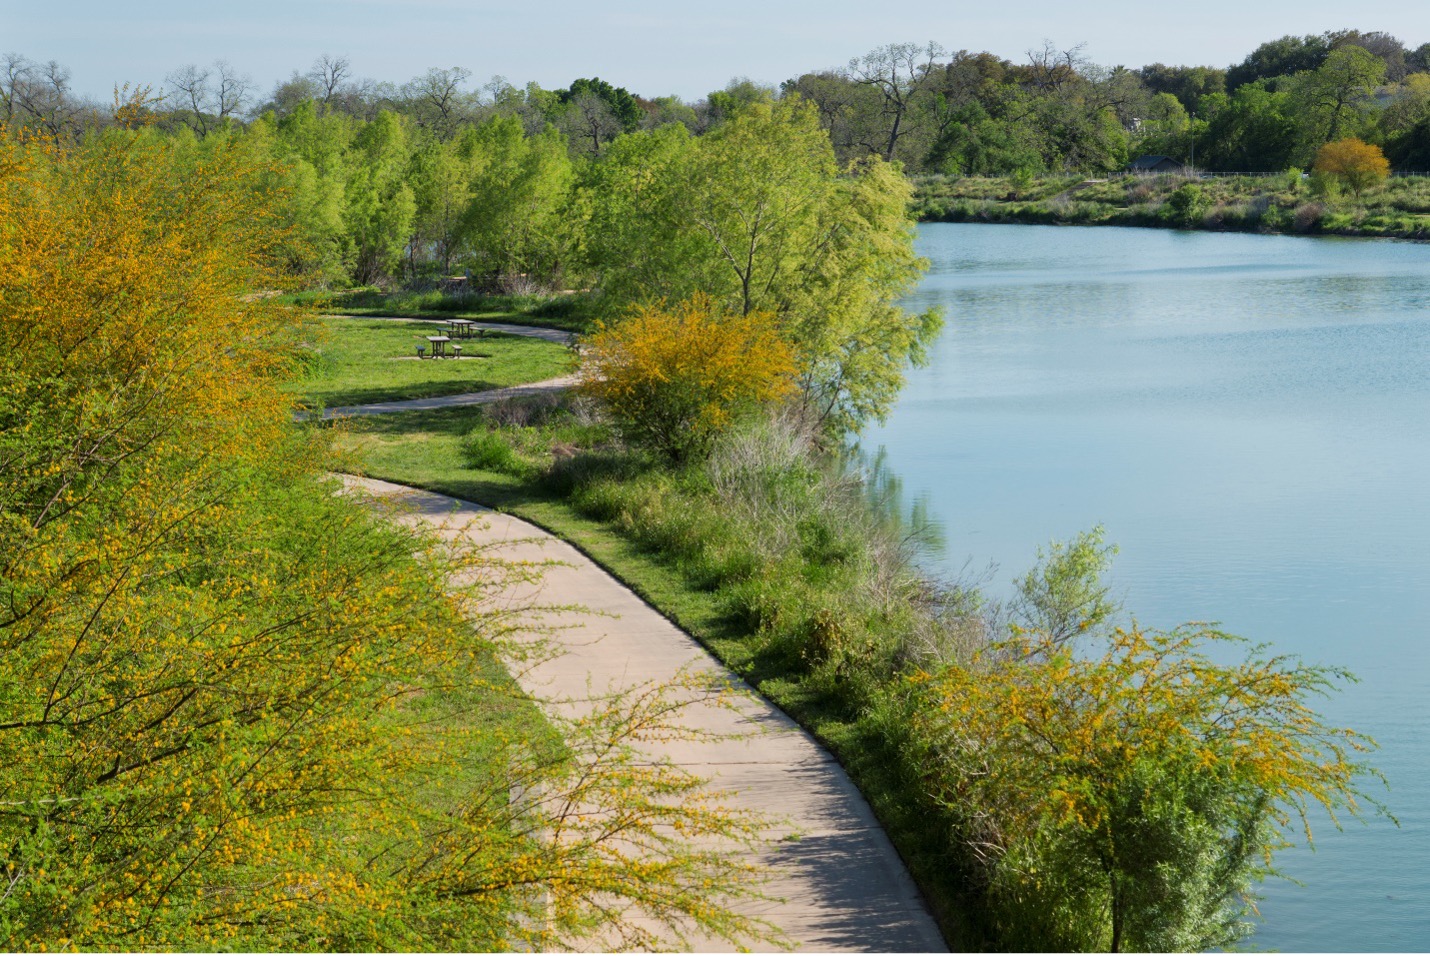 Walking trail at Mission Reach hugs the river bank of the San Antonio River.